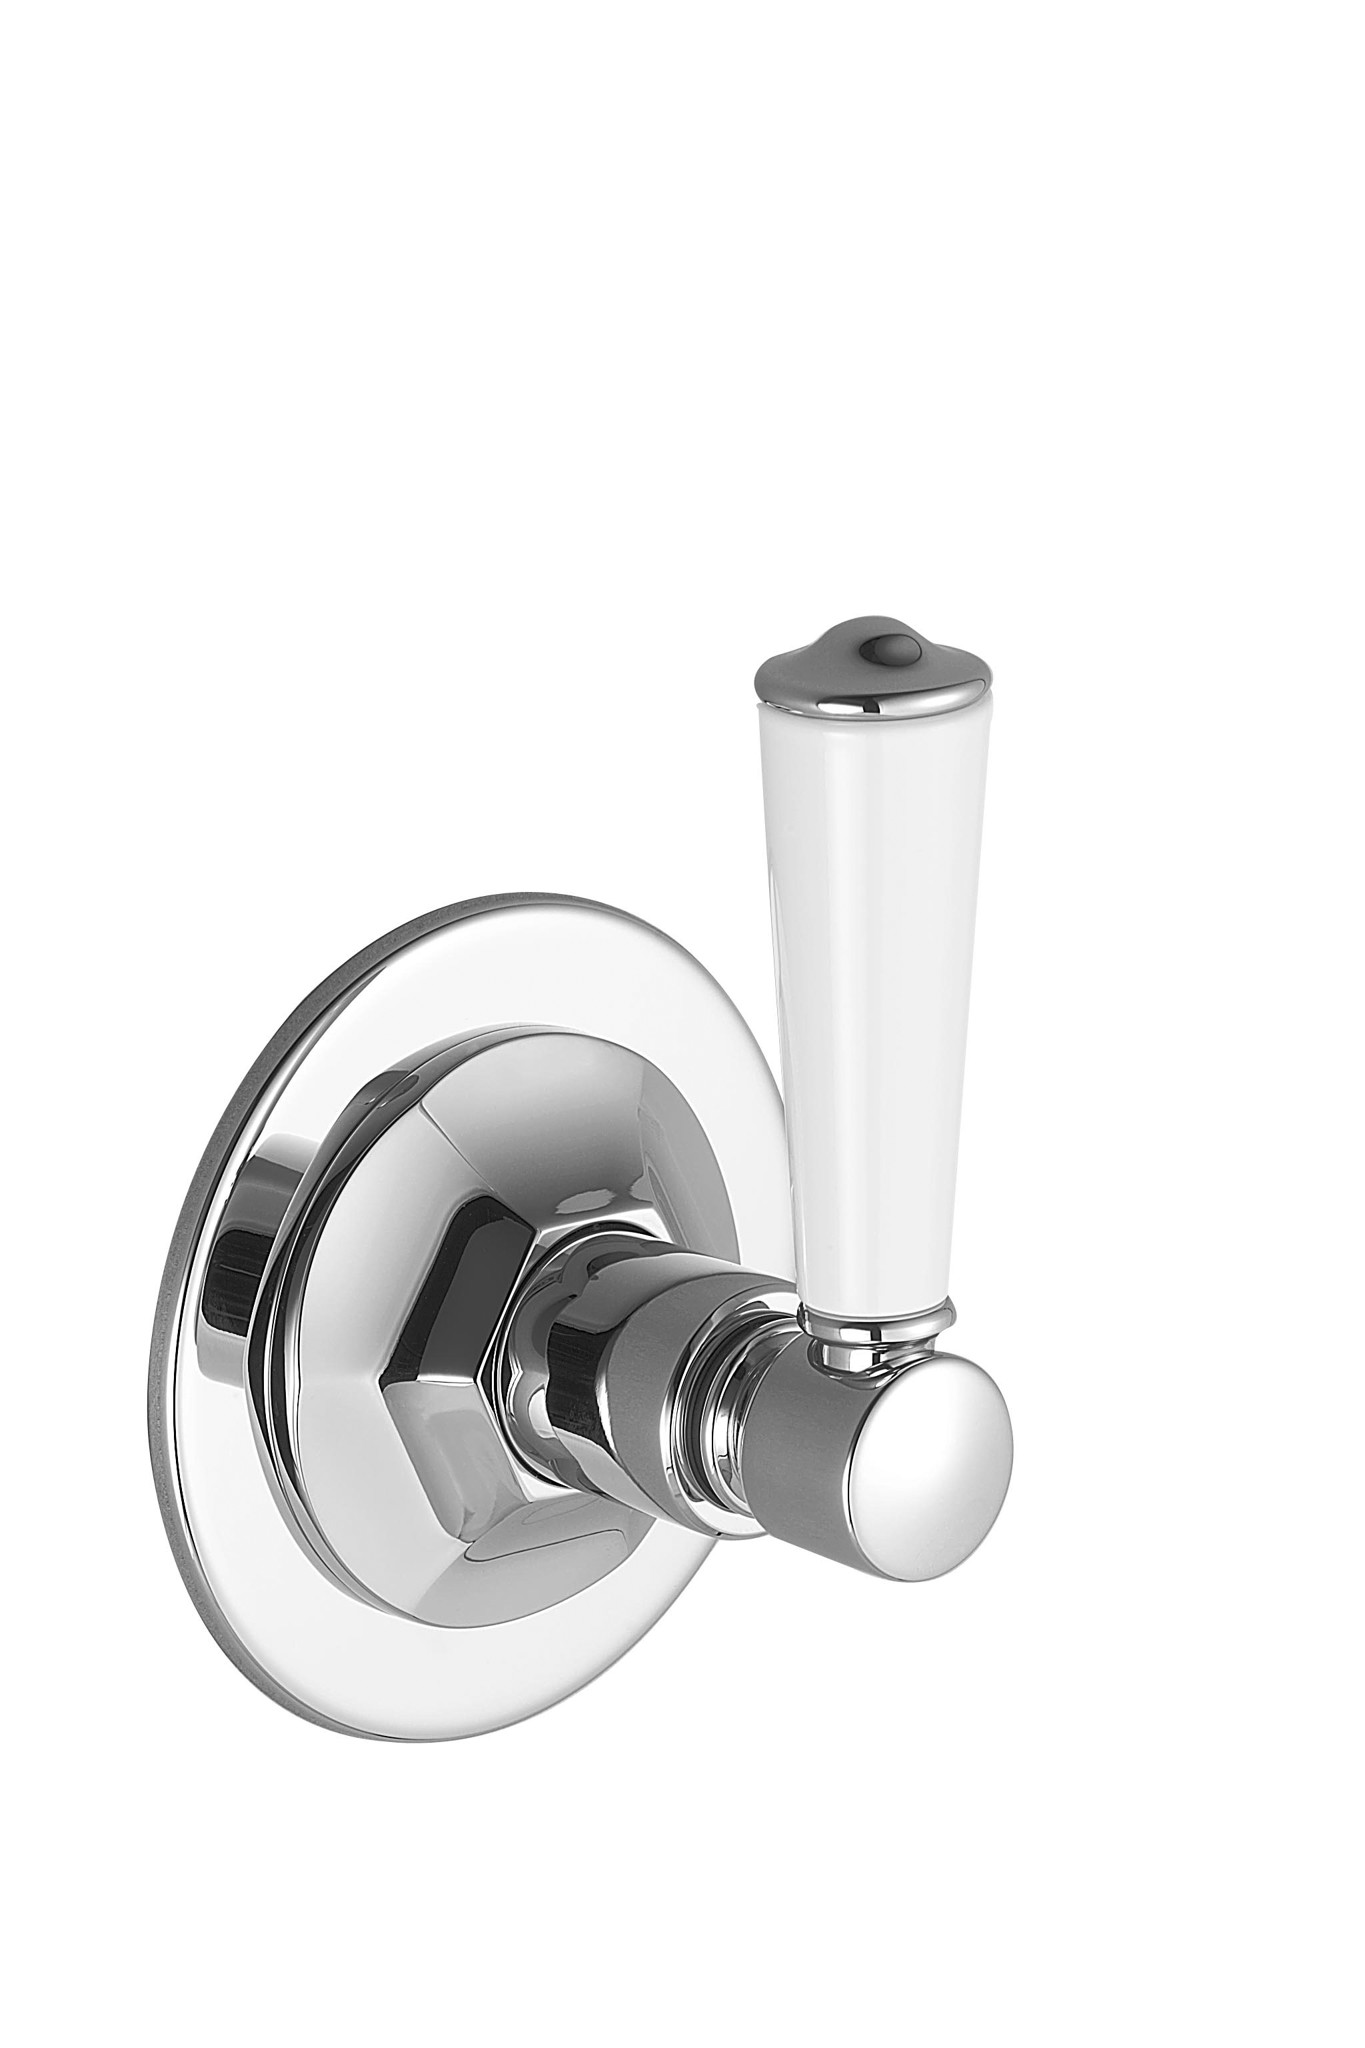 Picture of DORNBRACHT MADISON Concealed two- and three-way diverter - Chrome #36104370-00